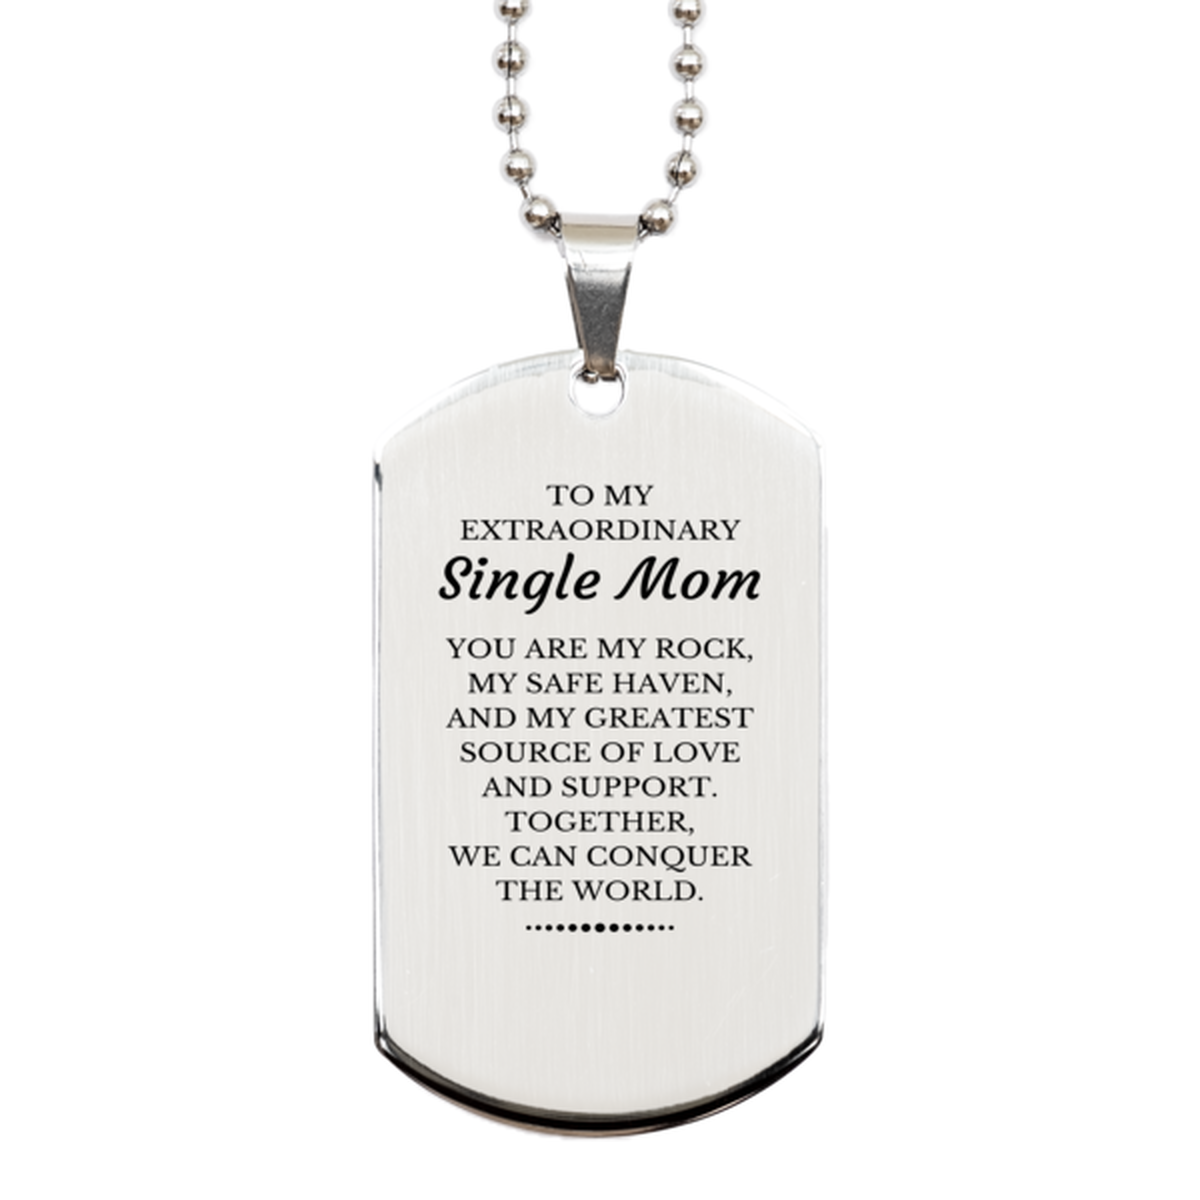 To My Extraordinary Single Mom Gifts, Together, we can conquer the world, Birthday Silver Dog Tag For Single Mom, Christmas Gifts For Single Mom